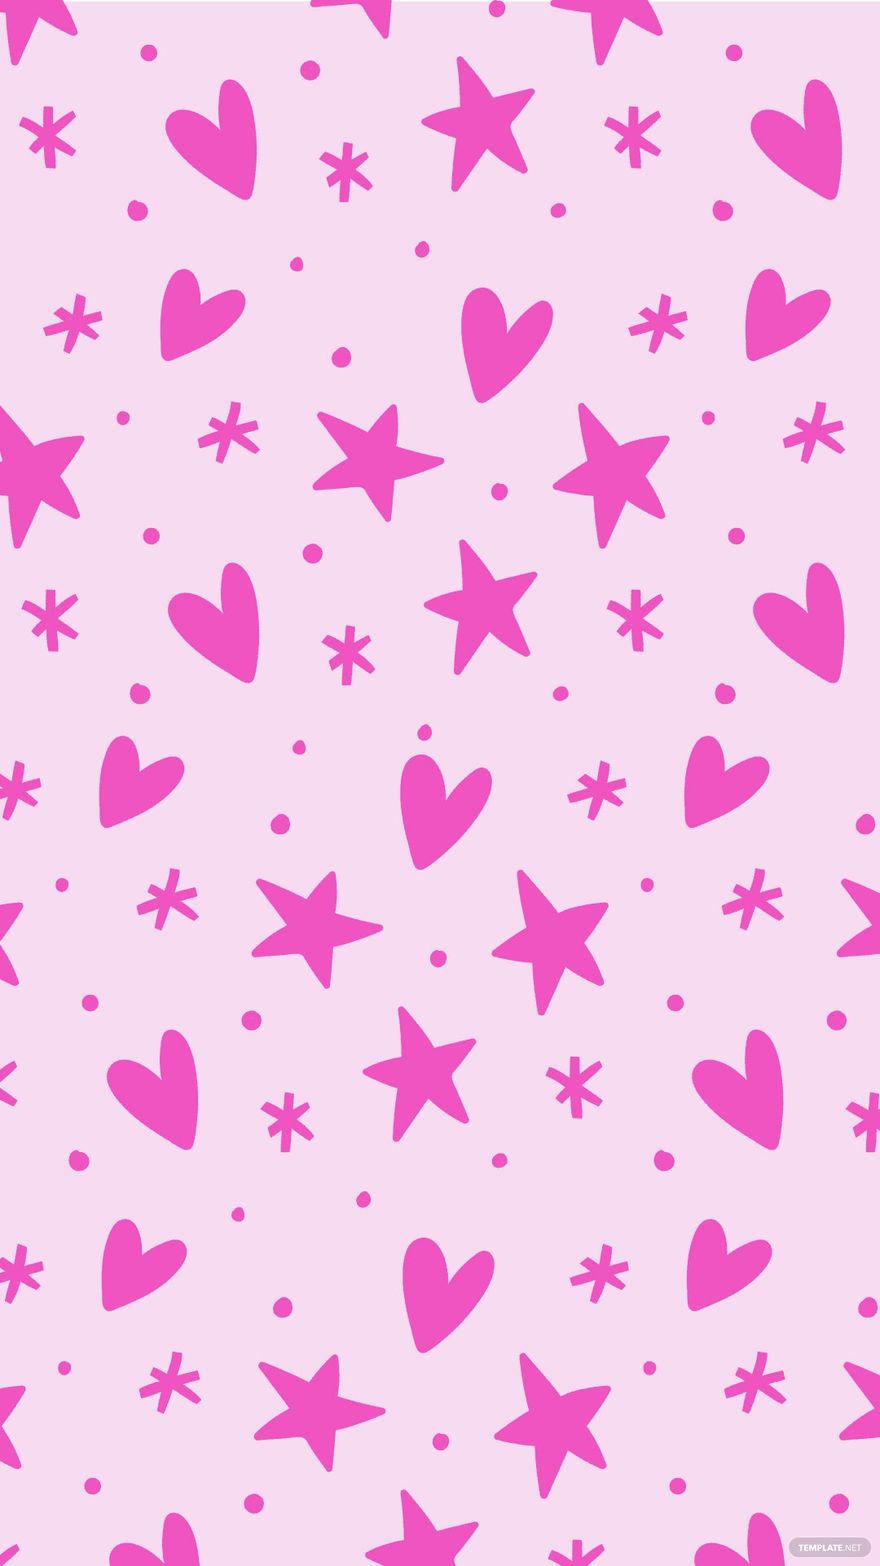 Free Hearts And Stars Background